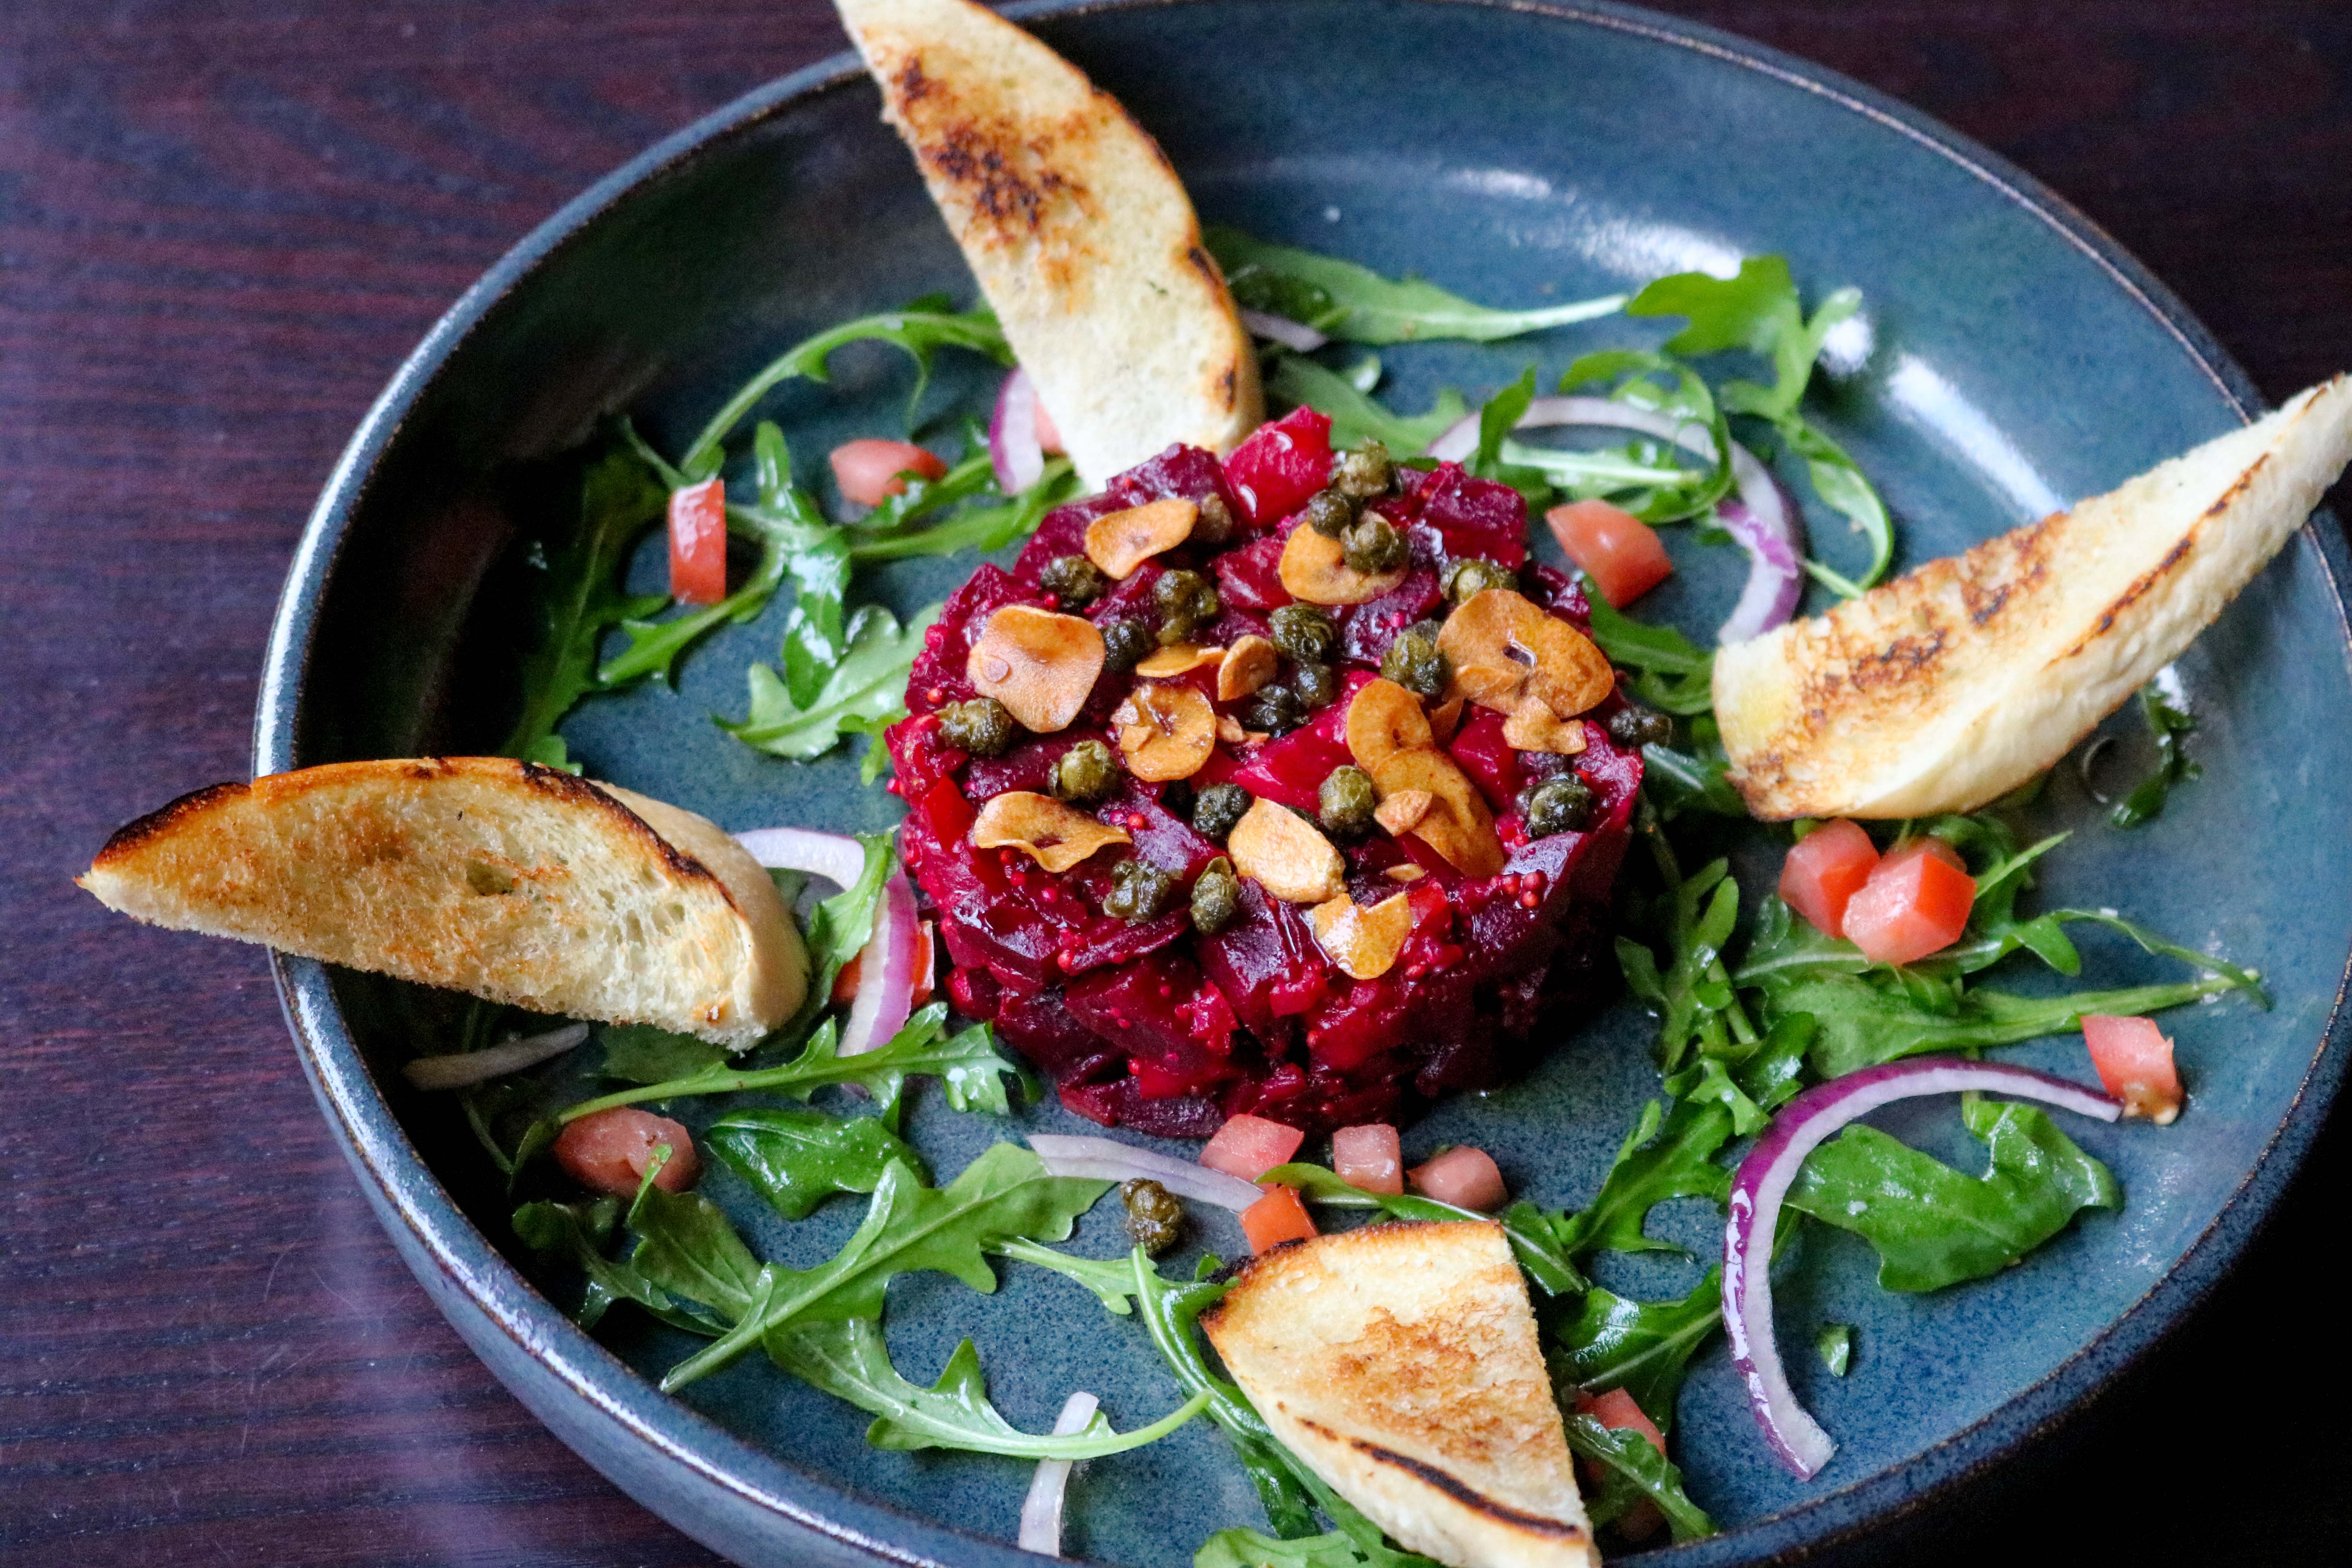 A dish of red beet tartare encircled with four slices of grilled bread in a shallow bowl.